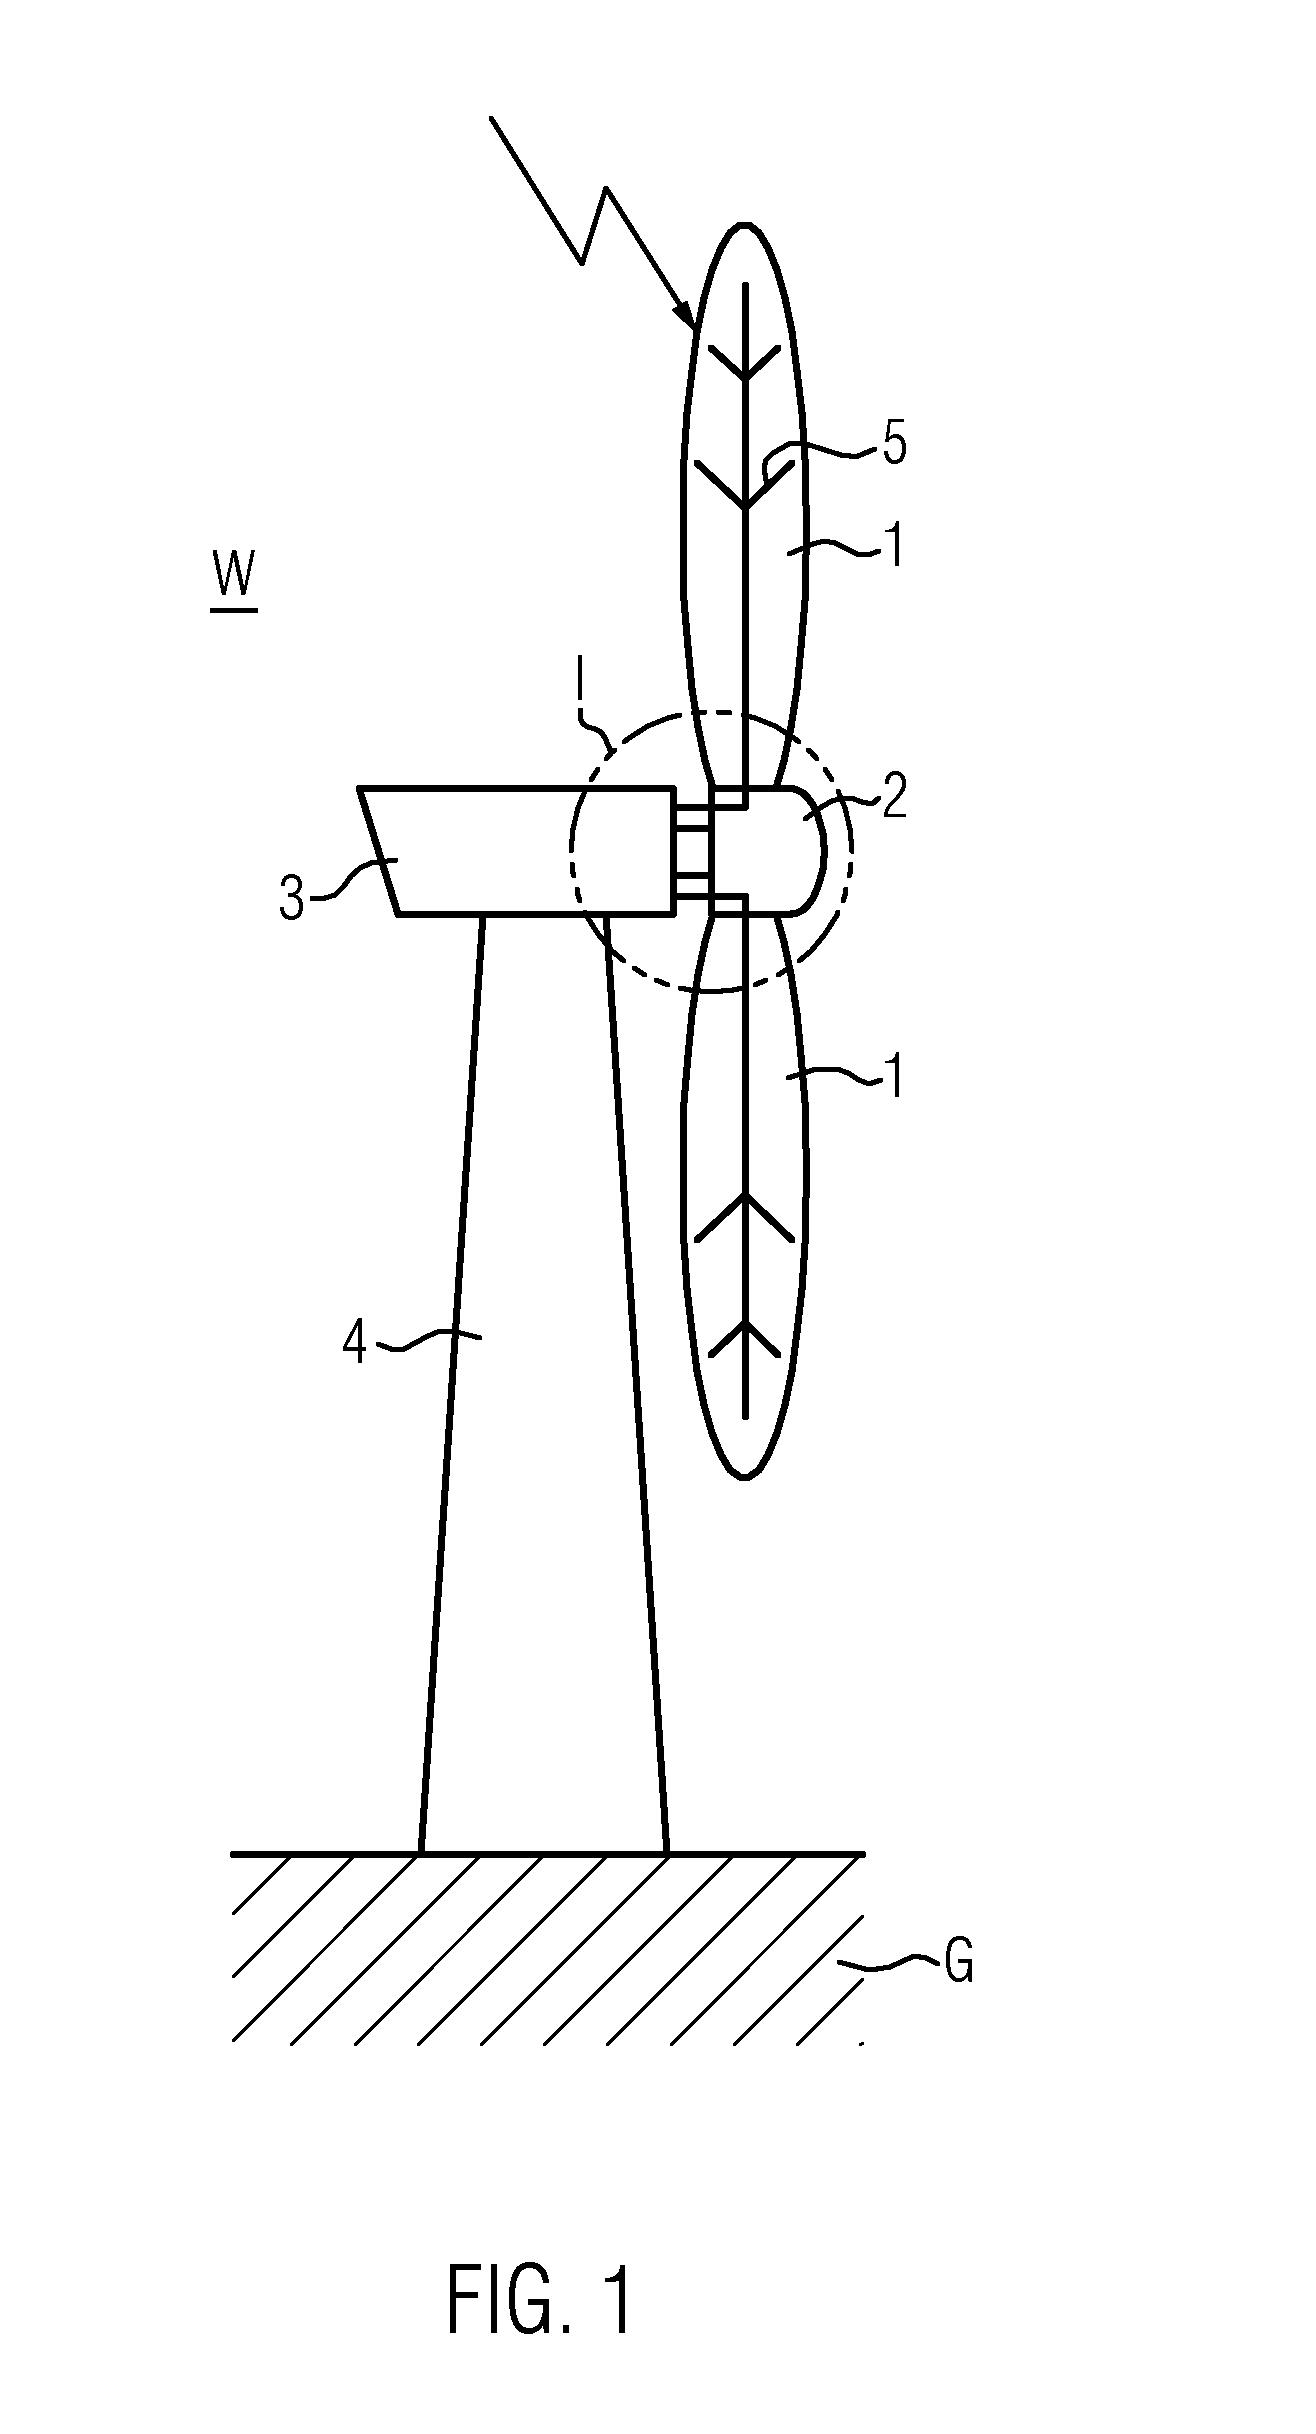 Lightning current transfer system and wind turbine using the lightning current transfer system